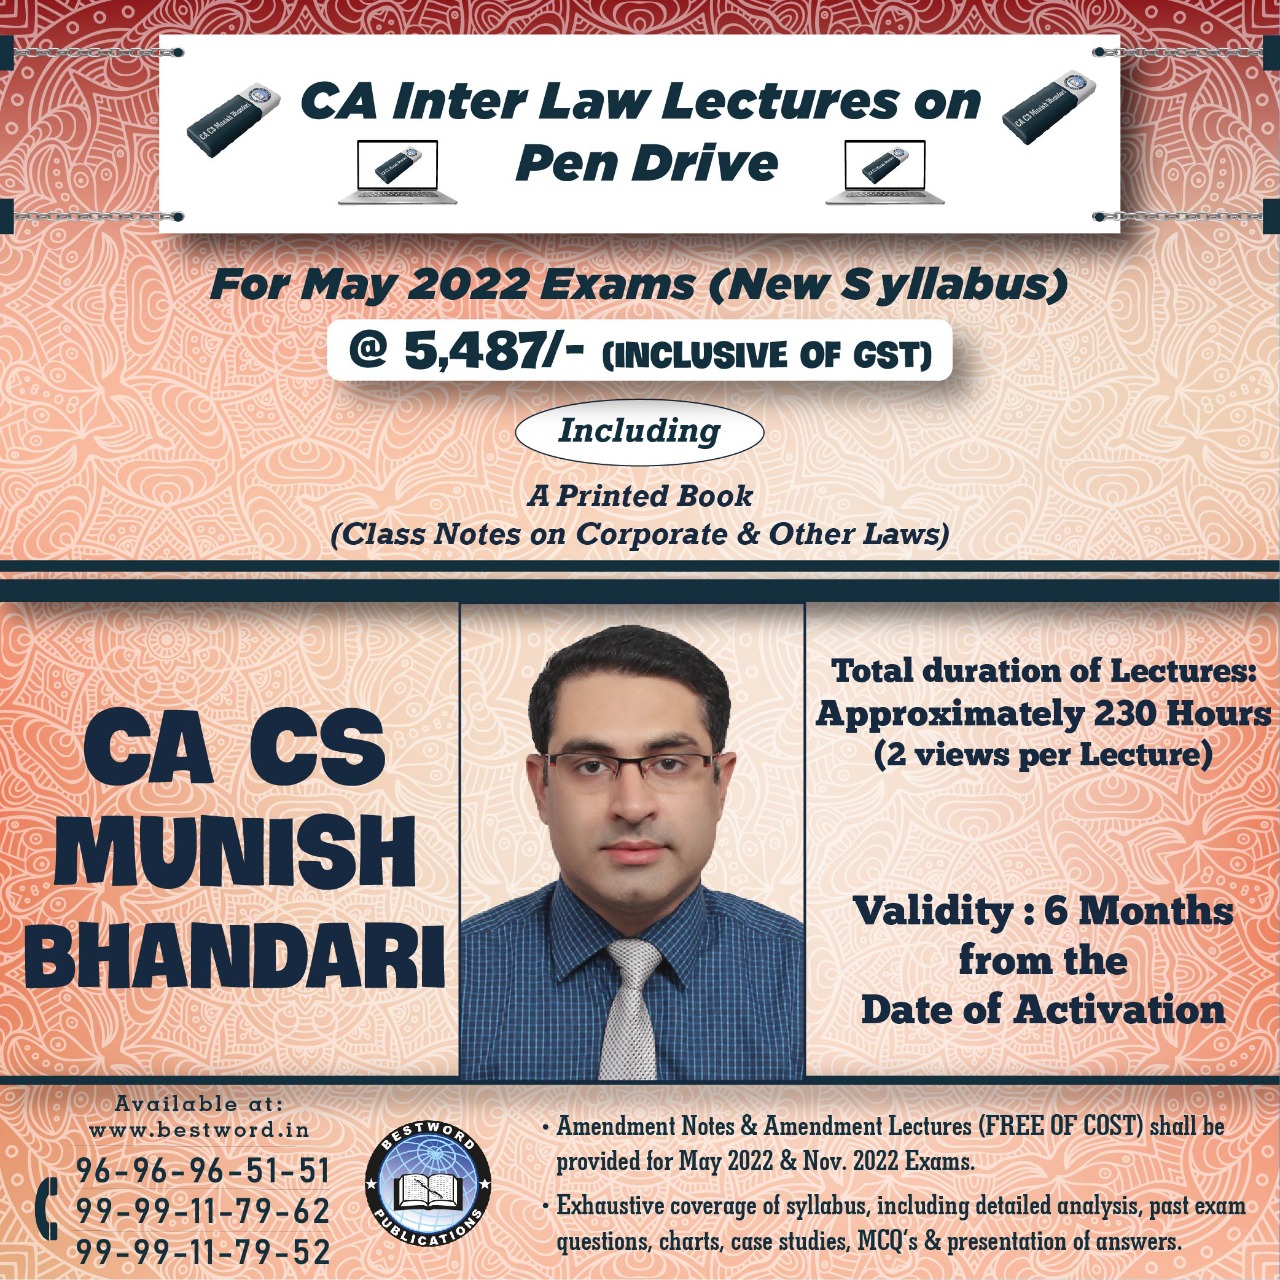 pen-drive-lectures-for-ca-inter-law-–-by-ca-cs-munish-bhandari---for-may-2022-exams-(corporate-and-other-laws---new-syllabus)-(old-recordings)